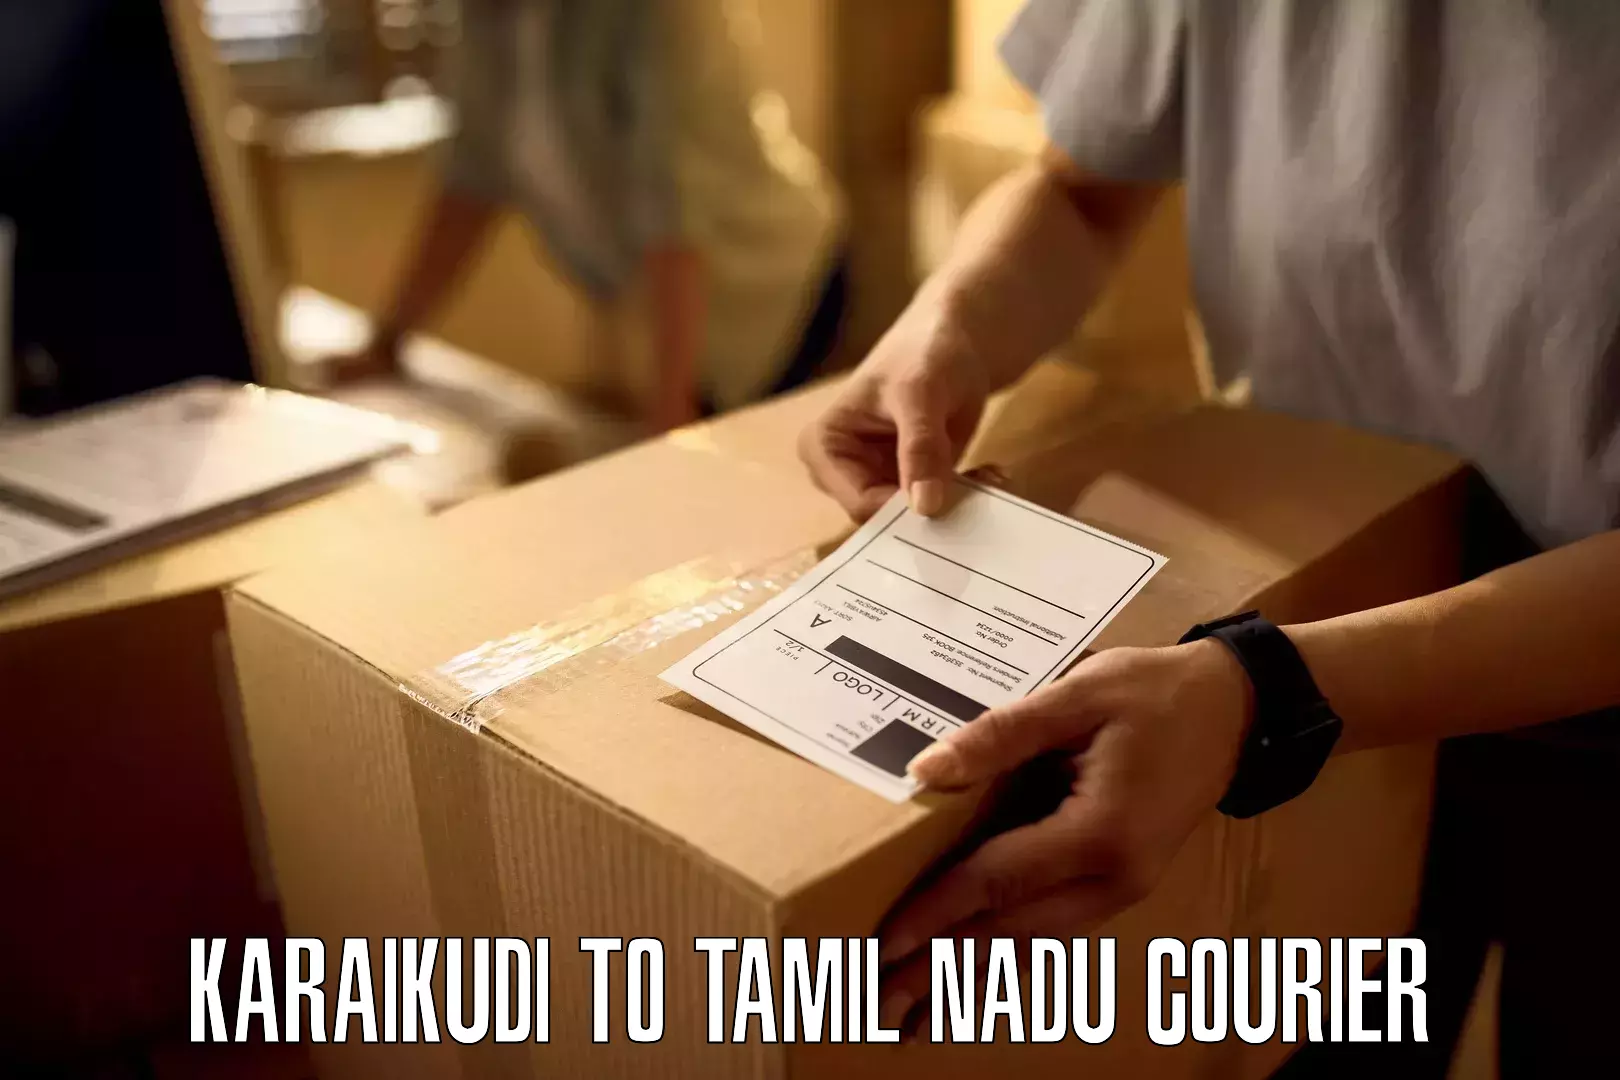 Domestic courier Karaikudi to Meenakshi Academy of Higher Education and Research Chennai